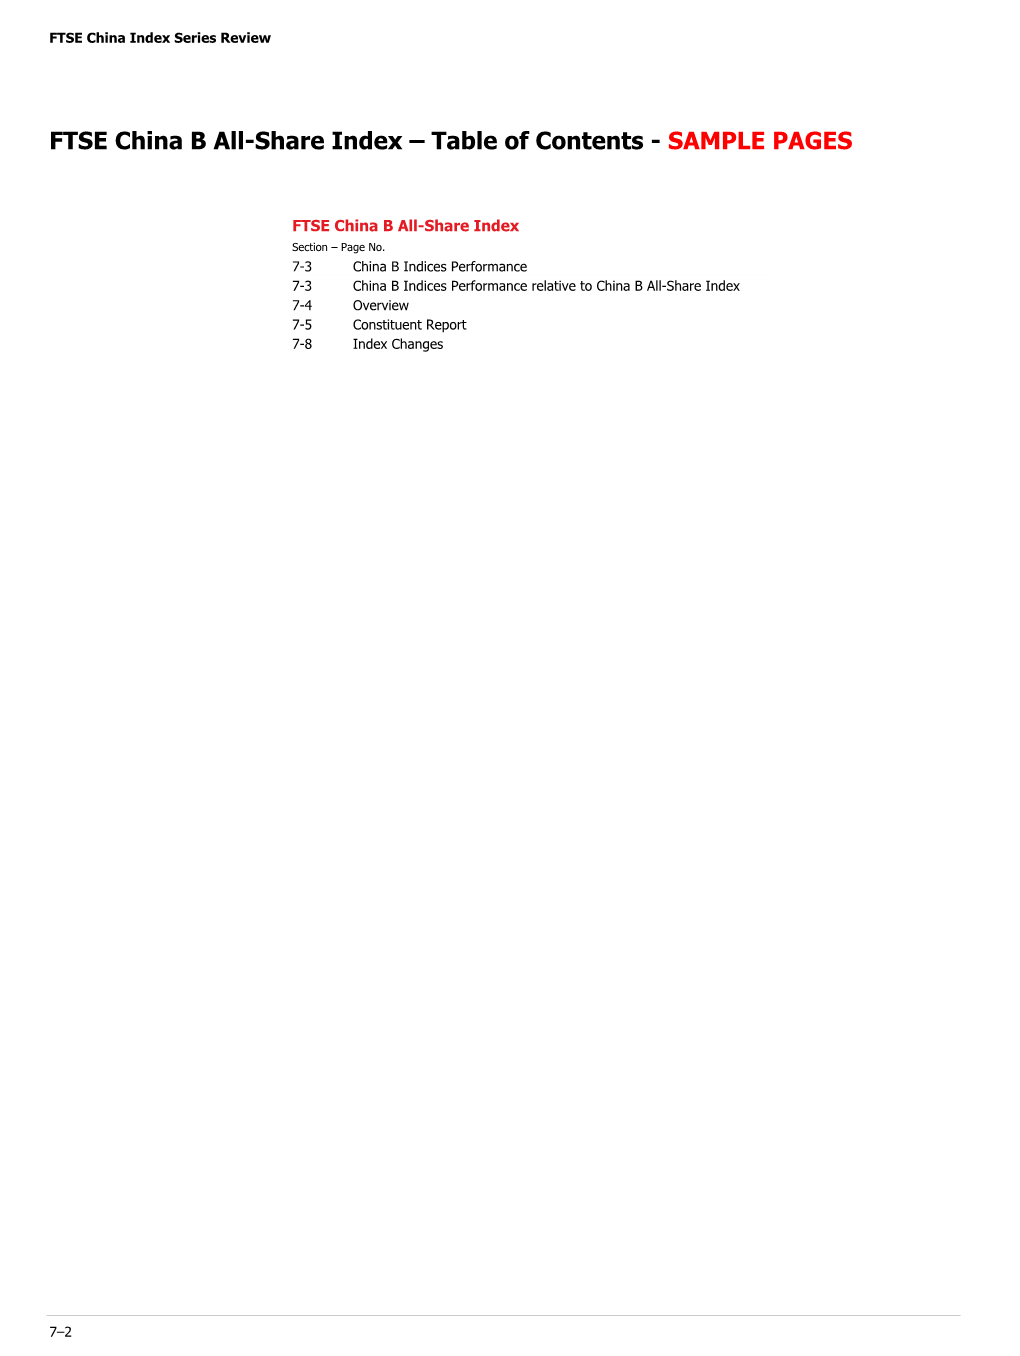 FTSE China B All-Share Index – Table of Contents - SAMPLE PAGES